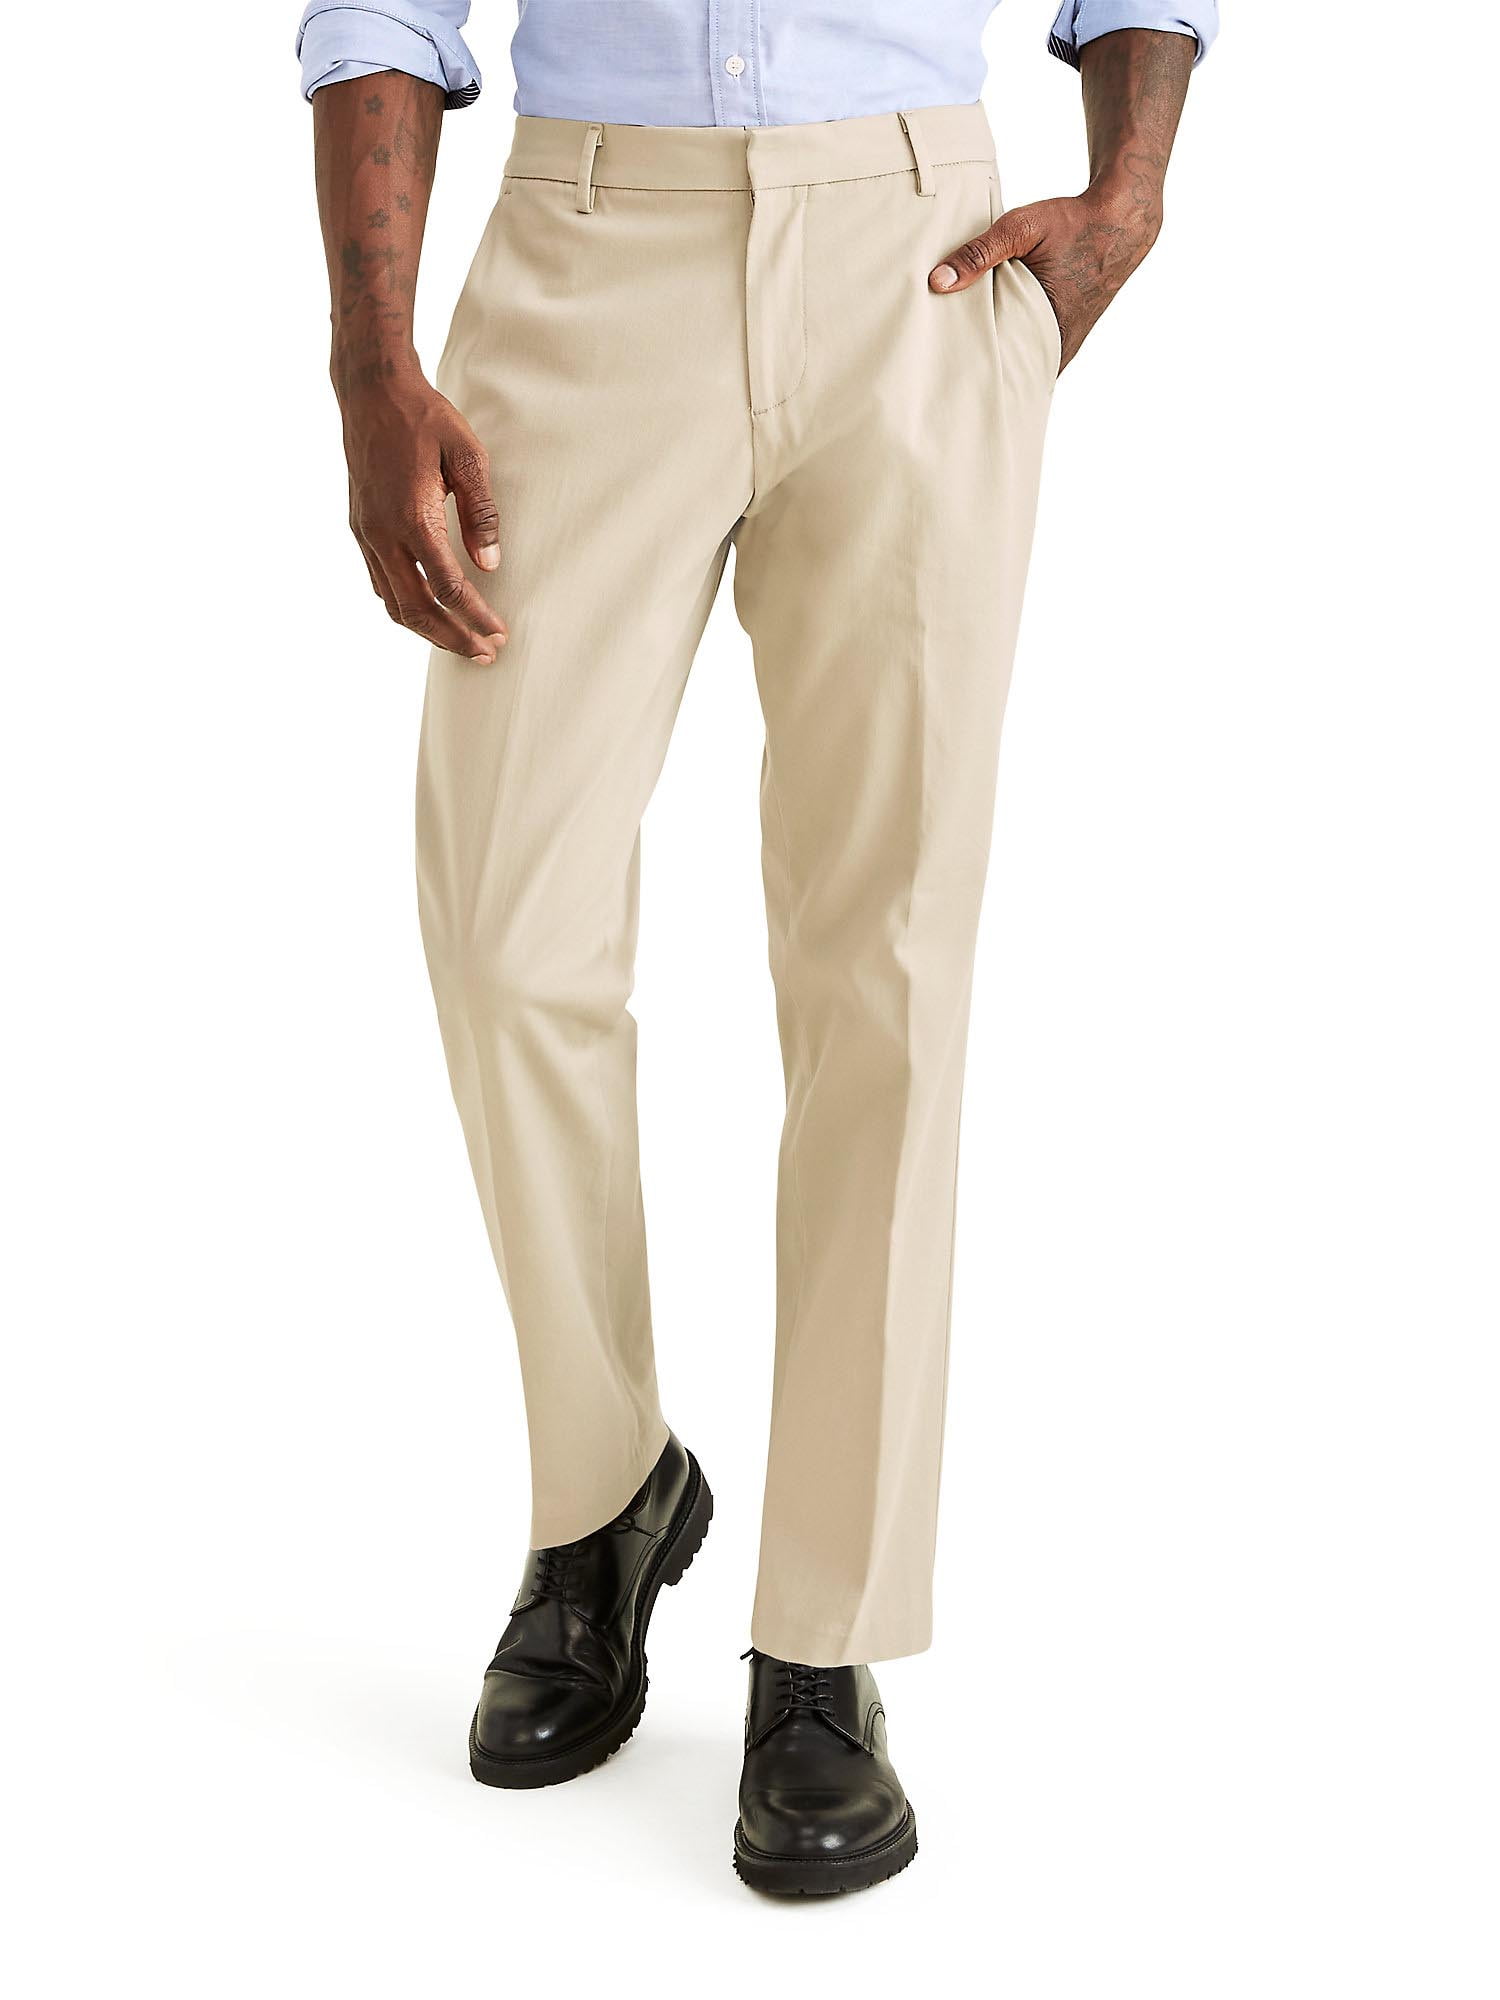 Buy Dockers Men's Classic Fit Easy Khaki Pants - Pleated, Timberwolf, 33W x  32L at Amazon.in